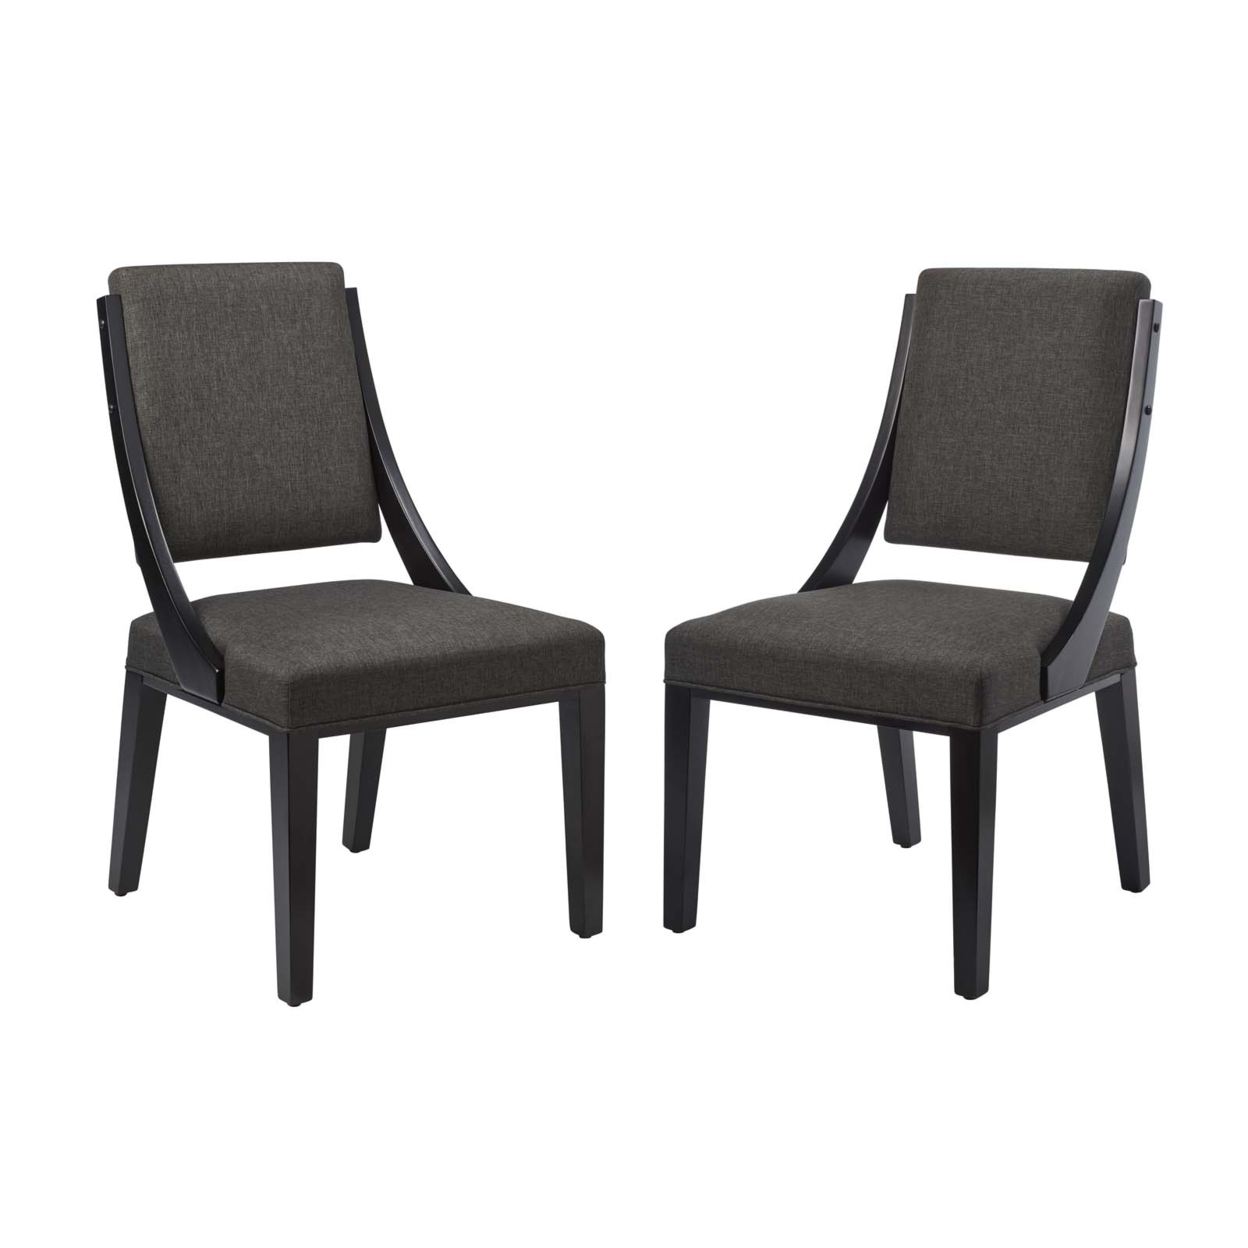 Cambridge Upholstered Fabric Dining Chairs - Set Of 2, Gray